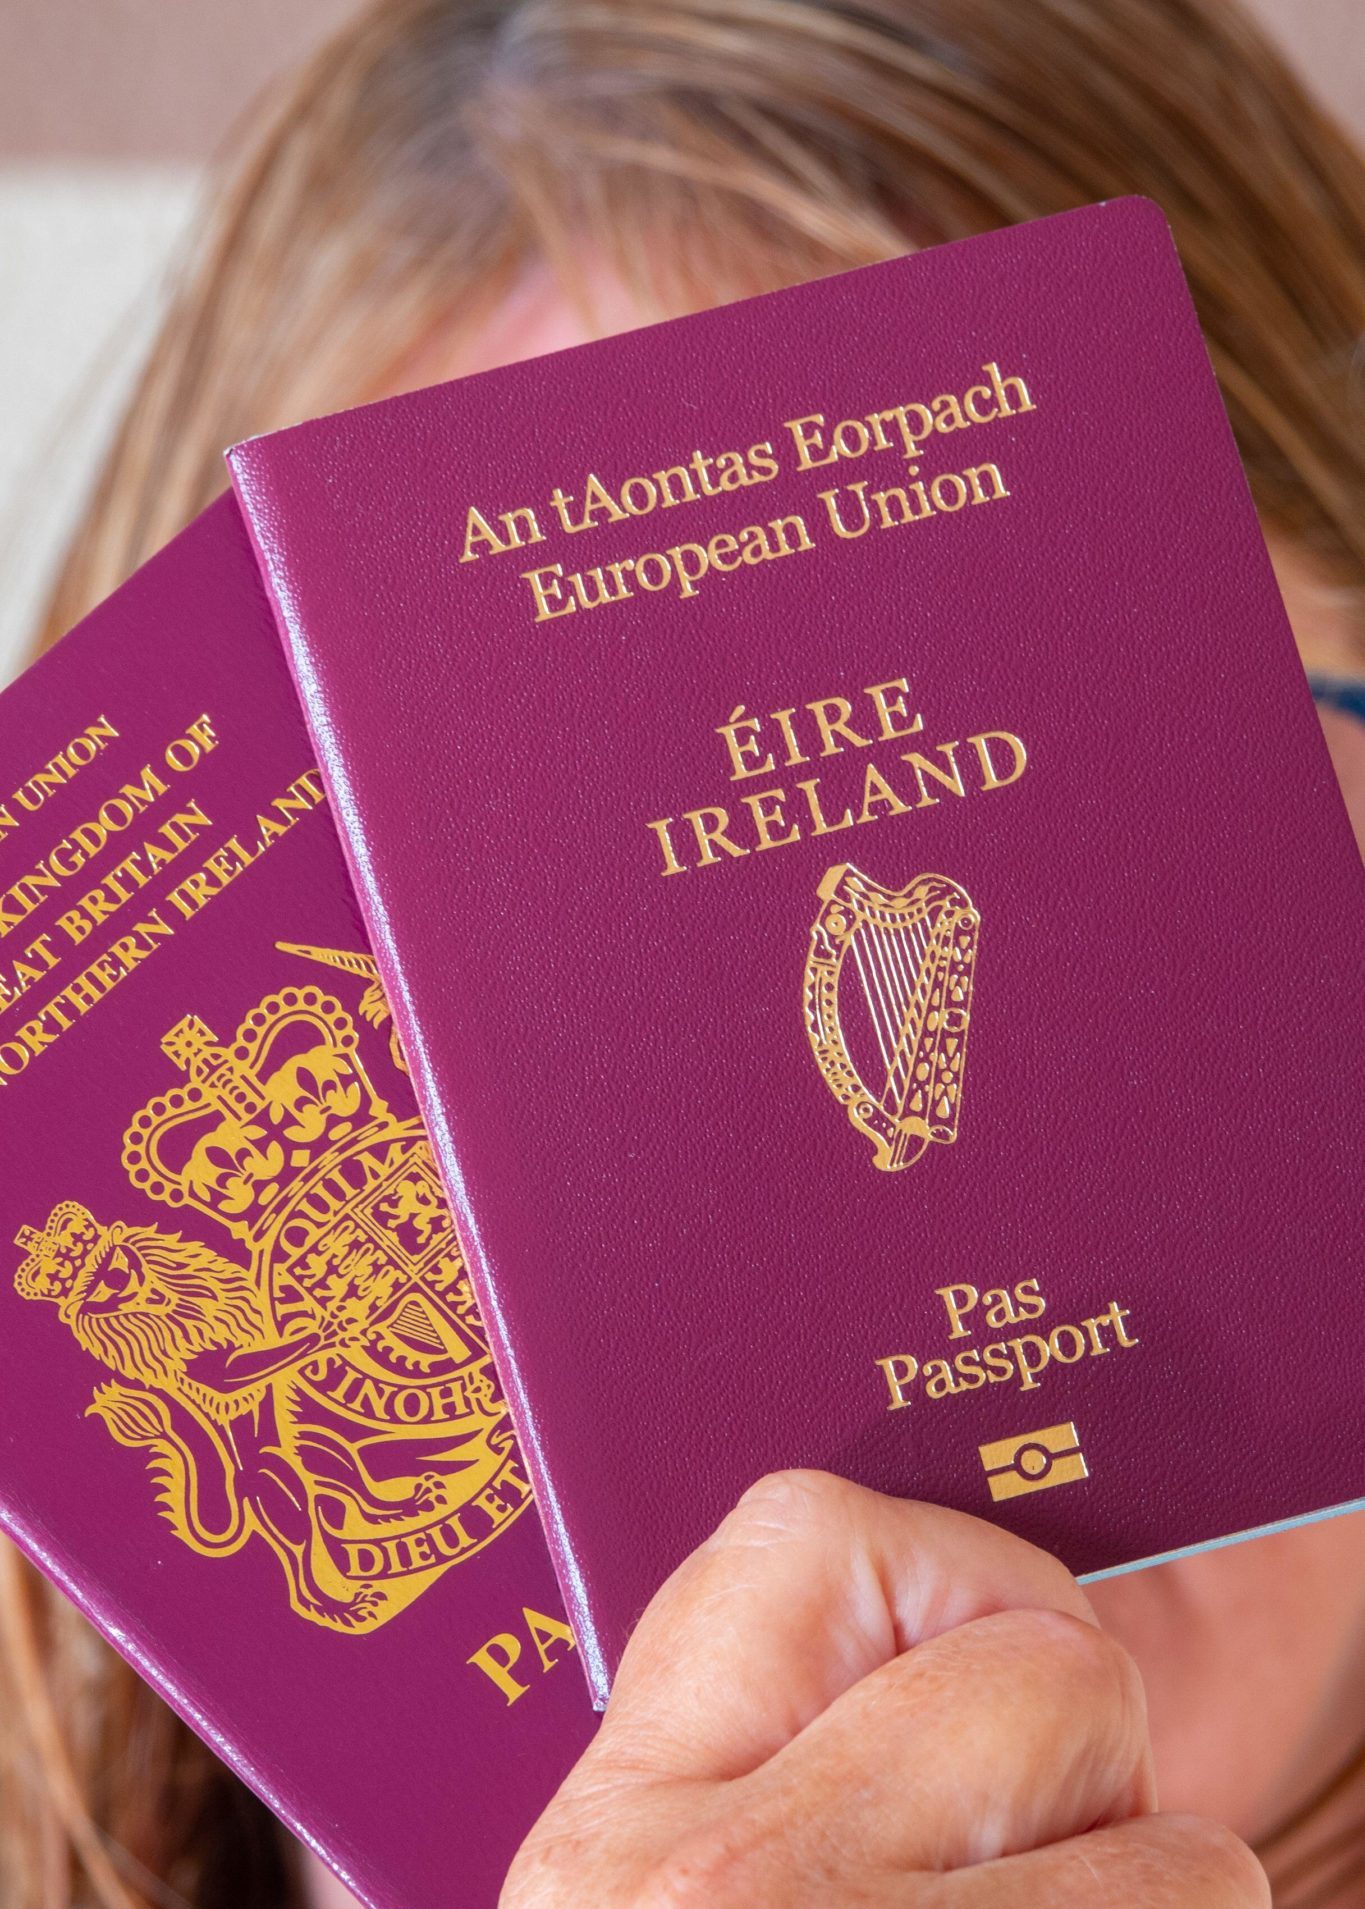 A woman holds an Irish and British passport in front of her face.